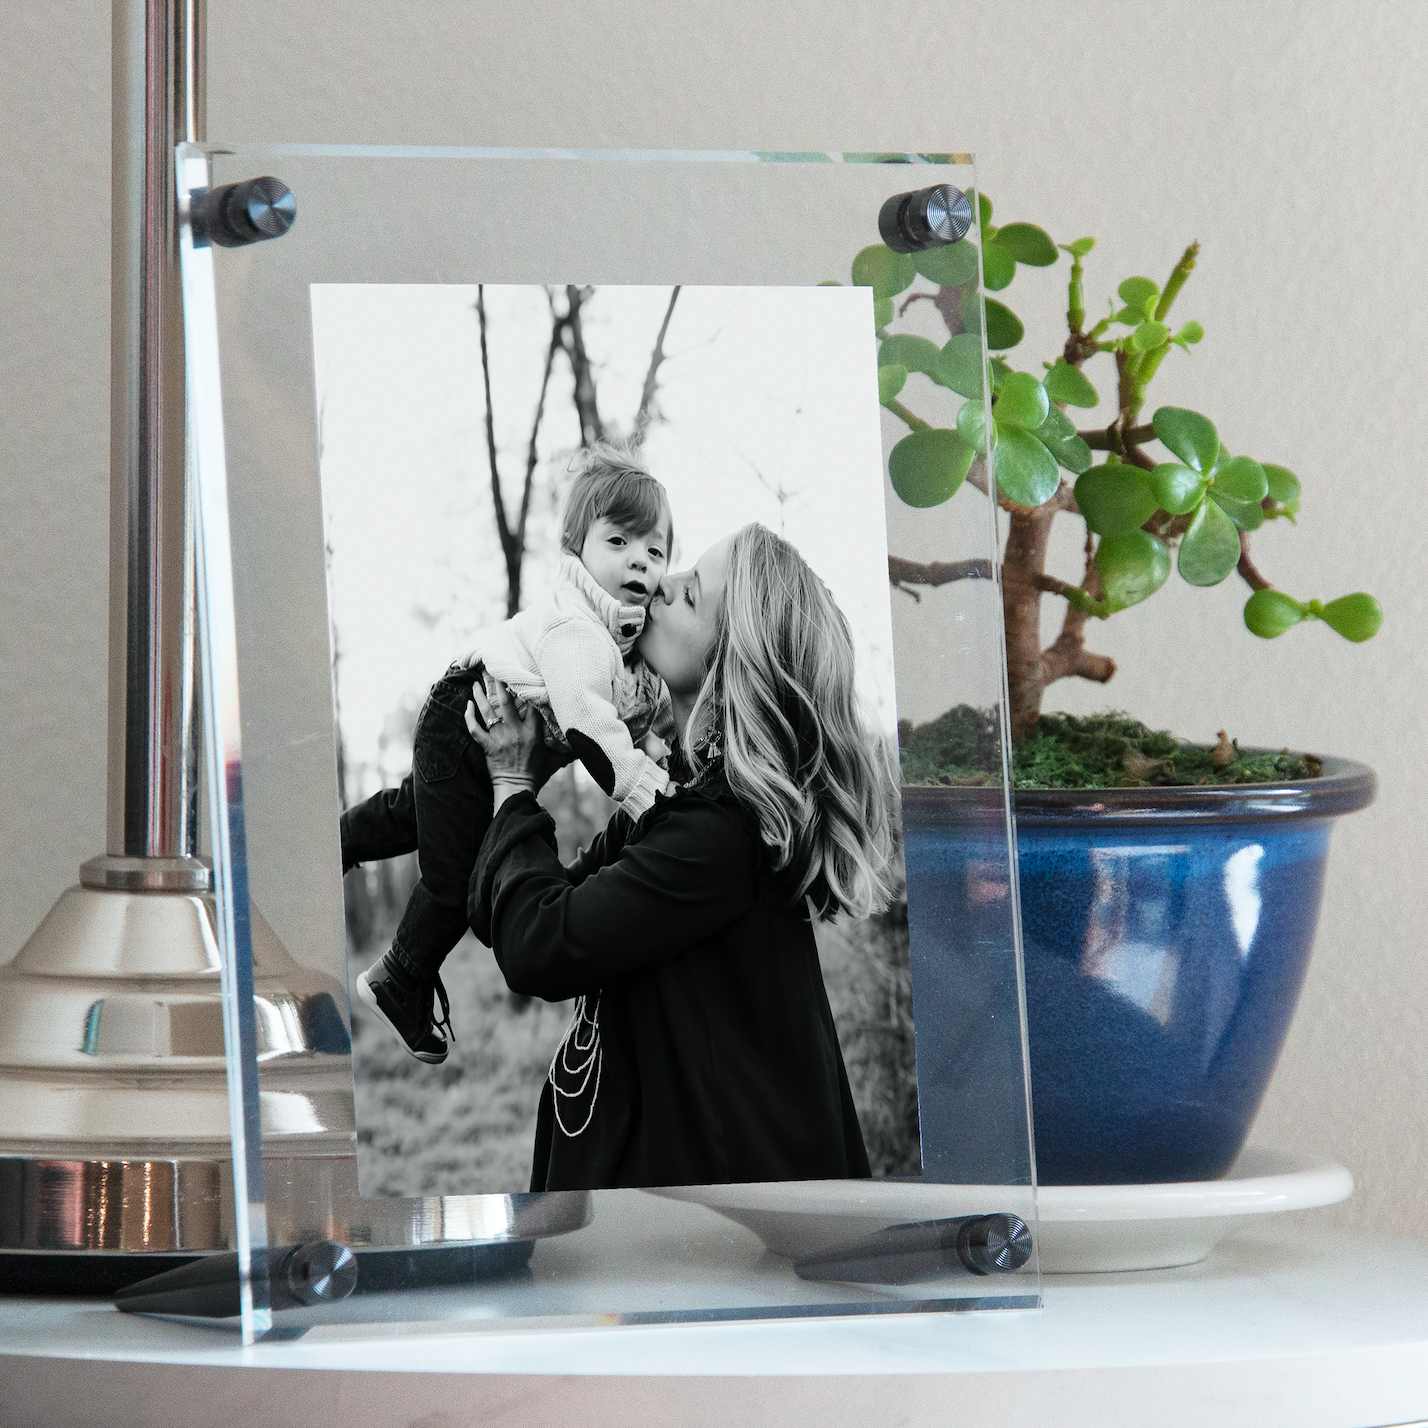 Mother's Day Tabletop Float Frames for 5x7" Photos